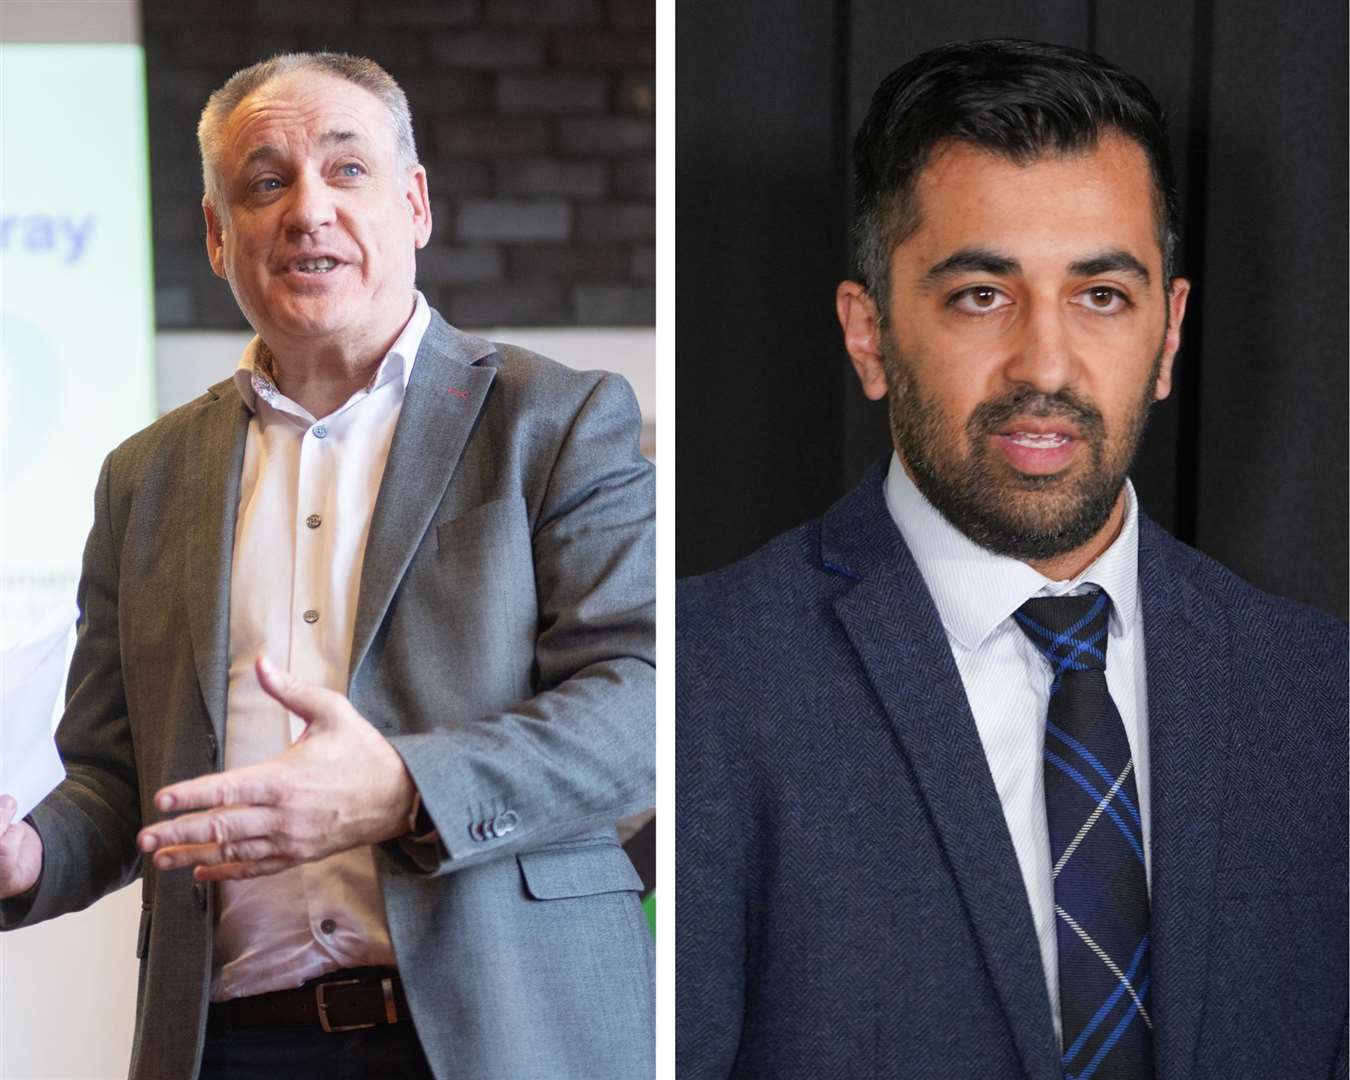 Moray MSP Richard Lochhead has congratulated Humza Yousaf on his victory in the SNP leadership contest today.